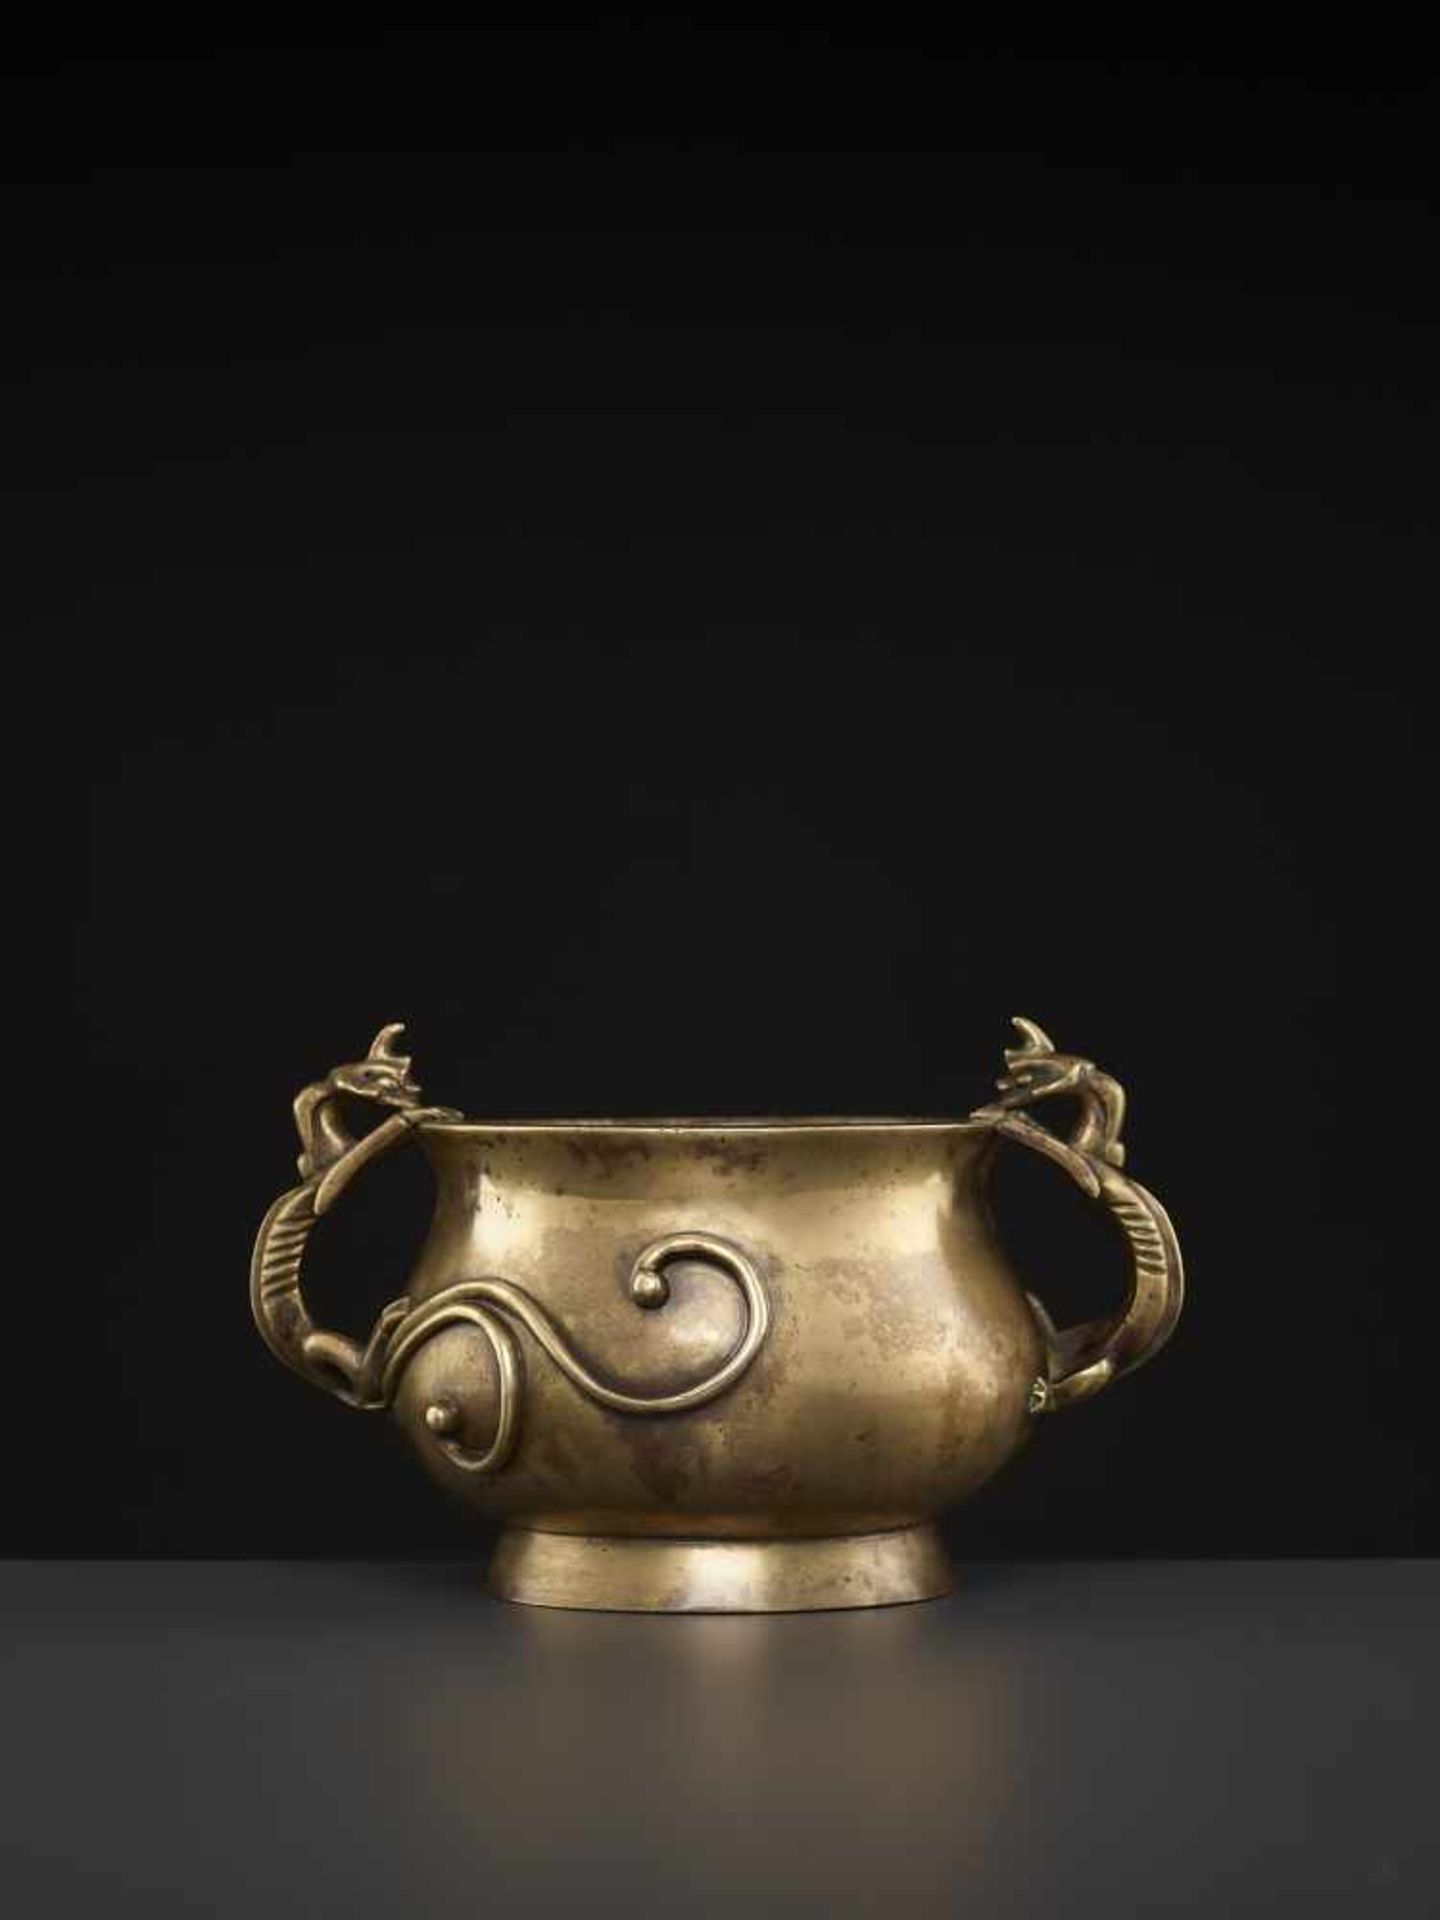 A LARGE CHILONG BRONZE CENSER, QINGChina, 1780-1880. The massive vessel raised from a sprawling foot